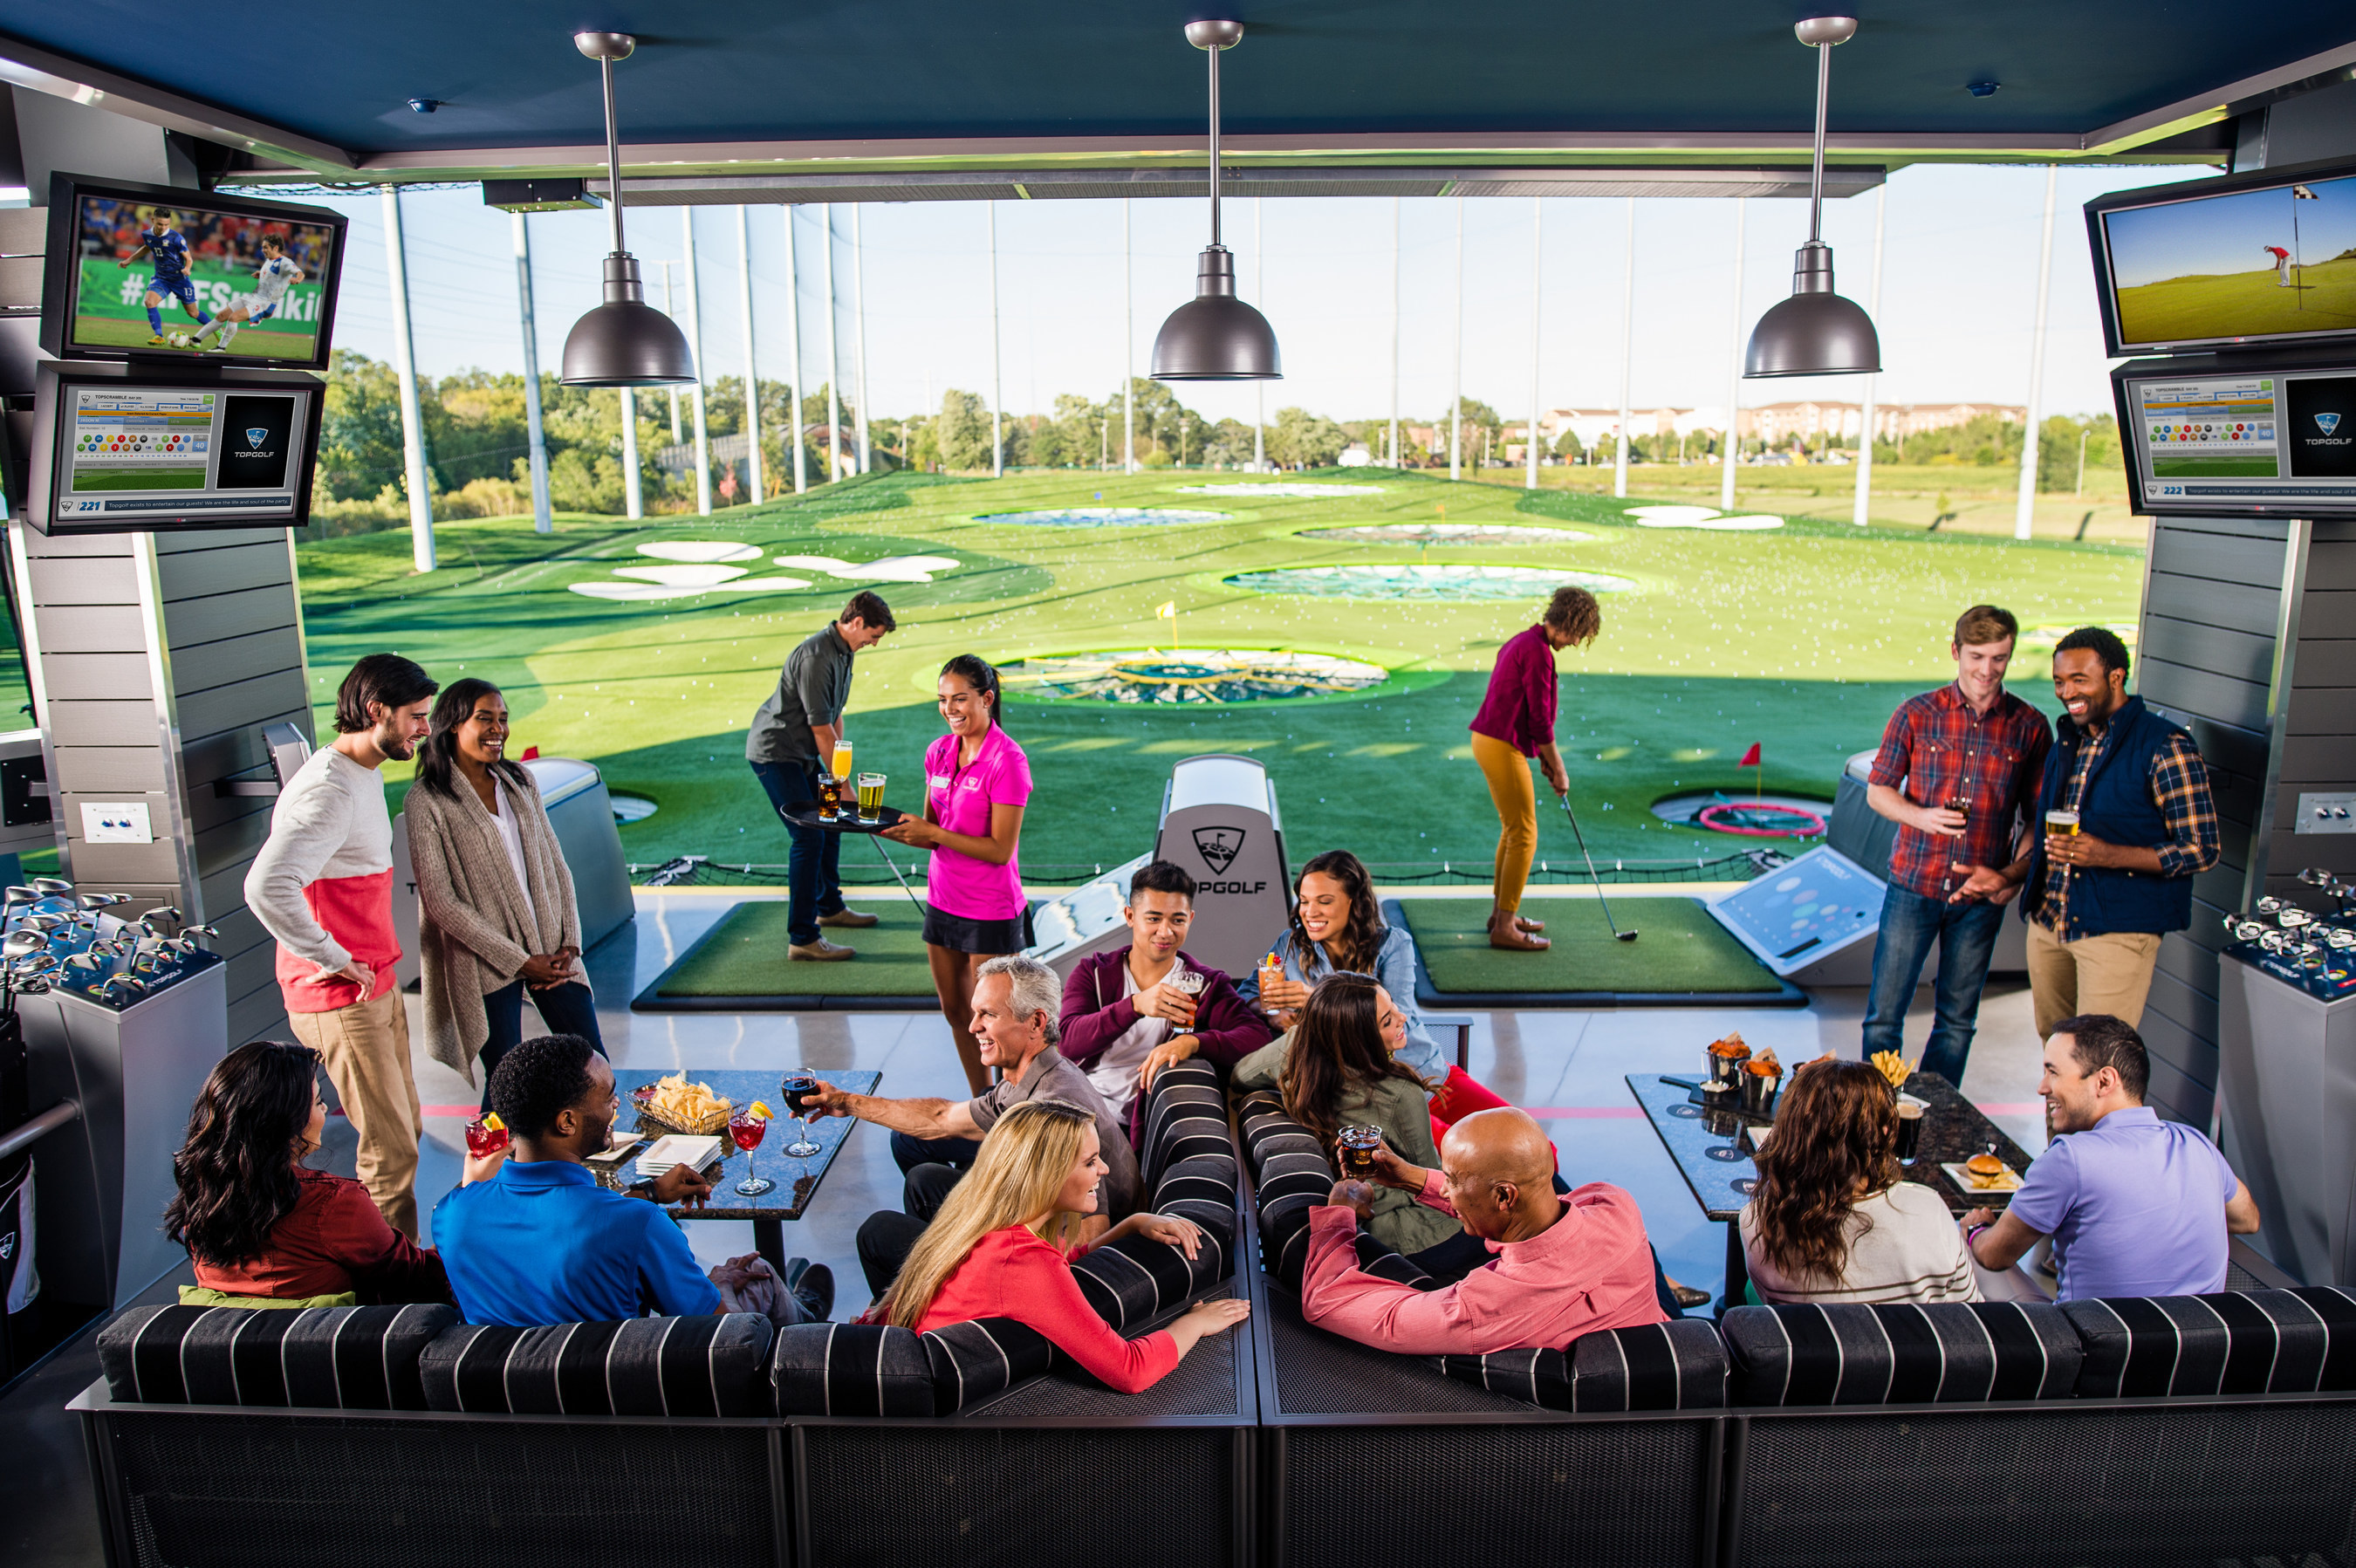 Guests playing Topgolf in Naperville, IL (PRNewsFoto/Topgolf)